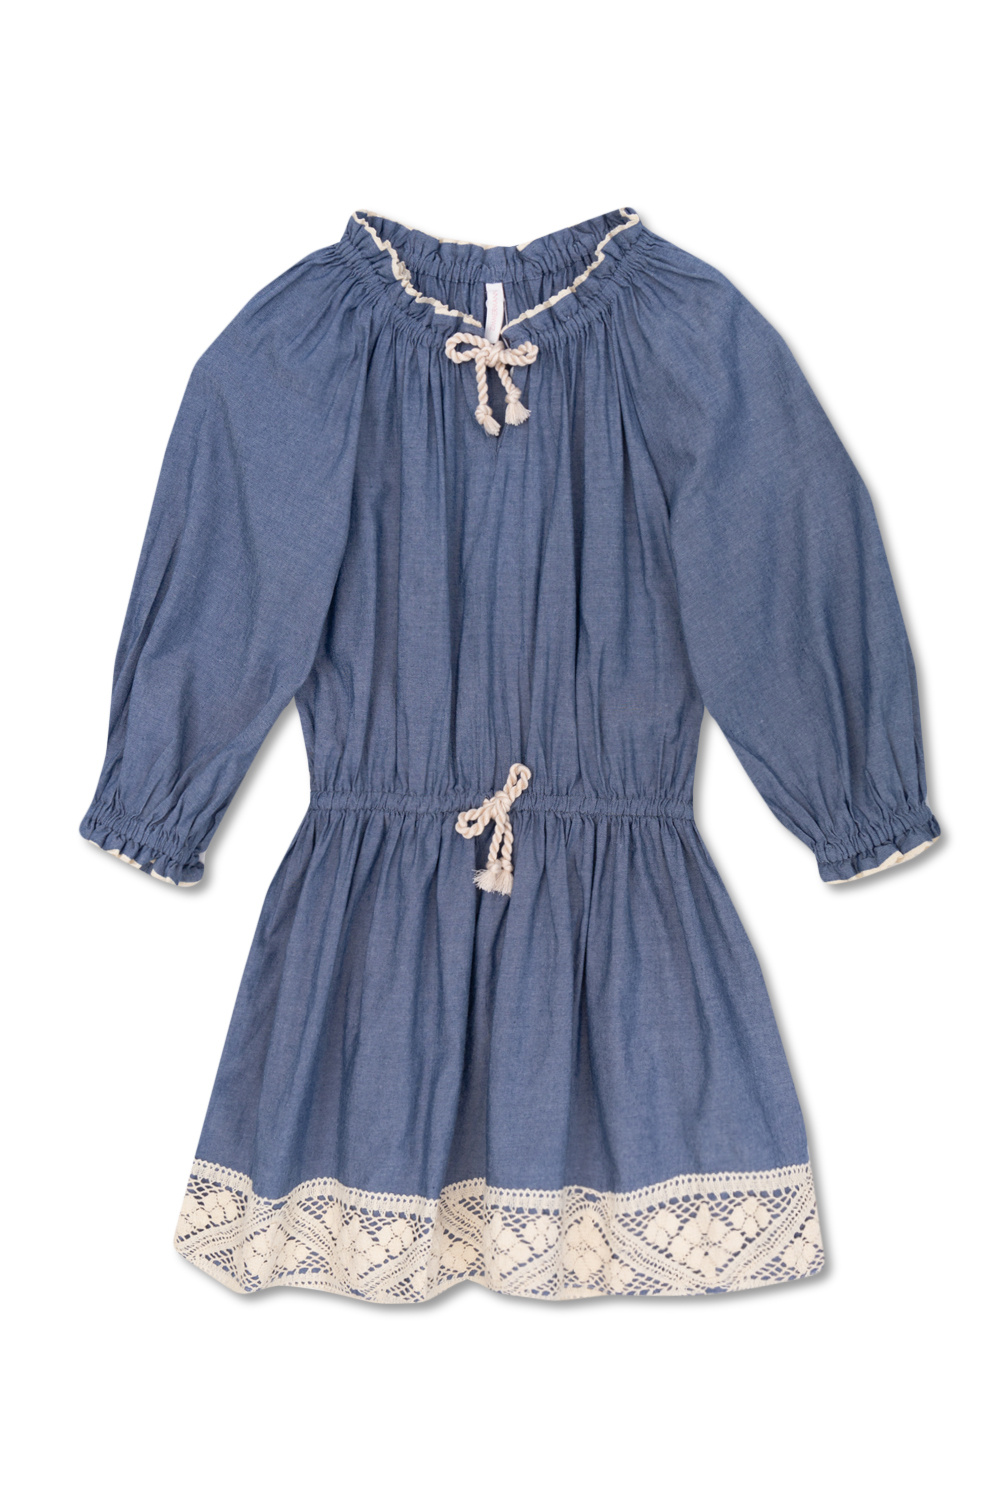 Zimmermann Kids textured dress with long sleeves